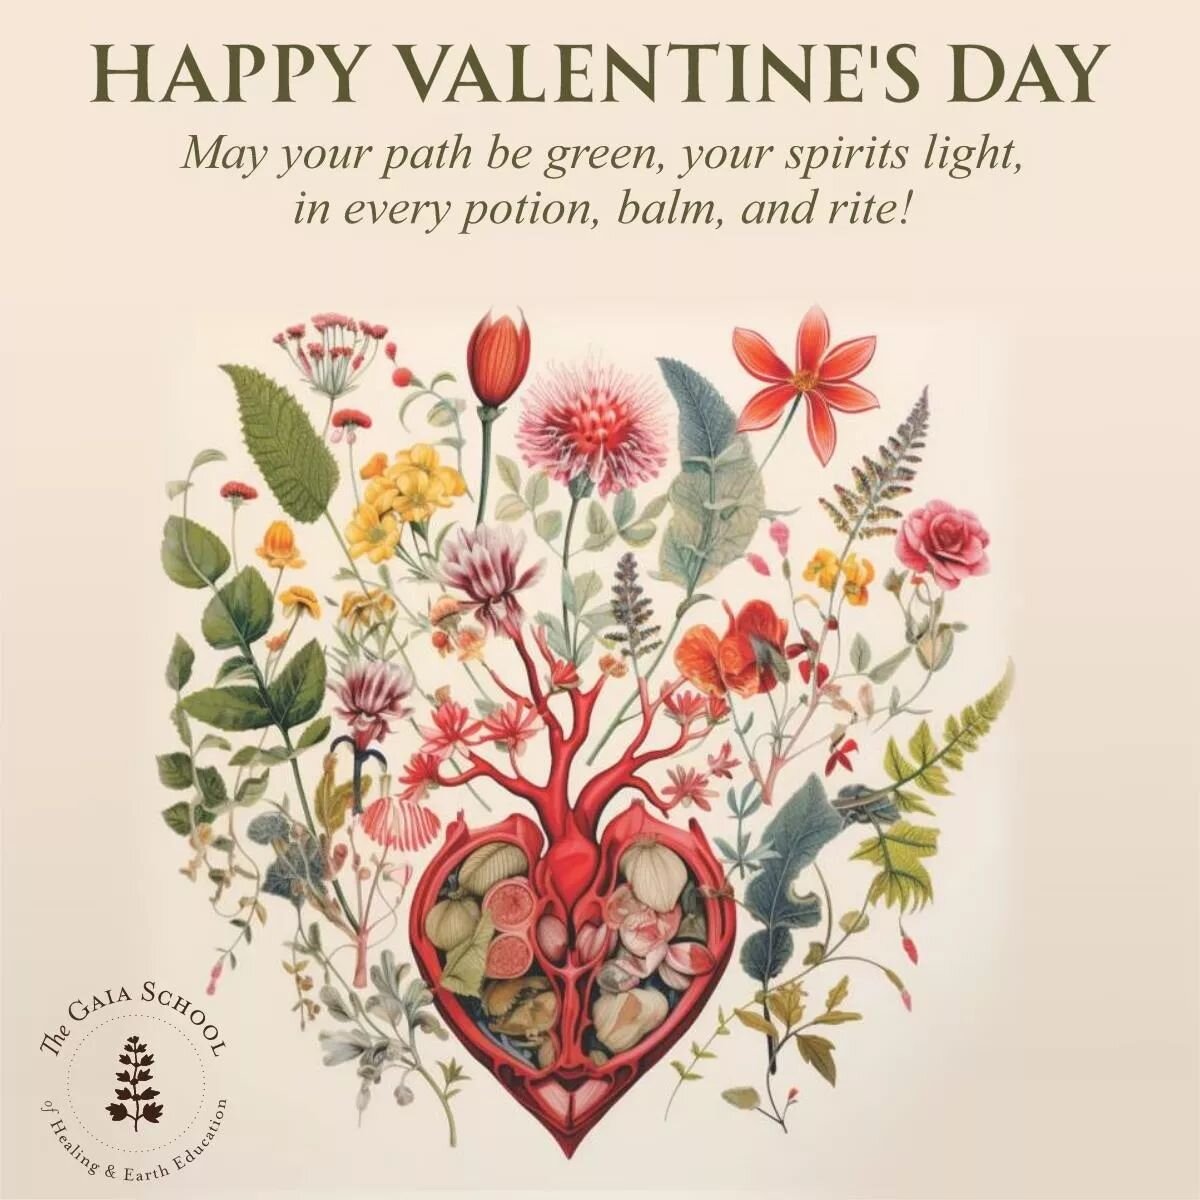 Happy Love day everyone! 🌿💖🌿 Drink some damiana, smoke some lotus, lick hibiscus glycerite off your lover... Open your heart to love with rose and hawthorn... healing the broken places and awakening us to sweetness again. 

Valentine's day has alw